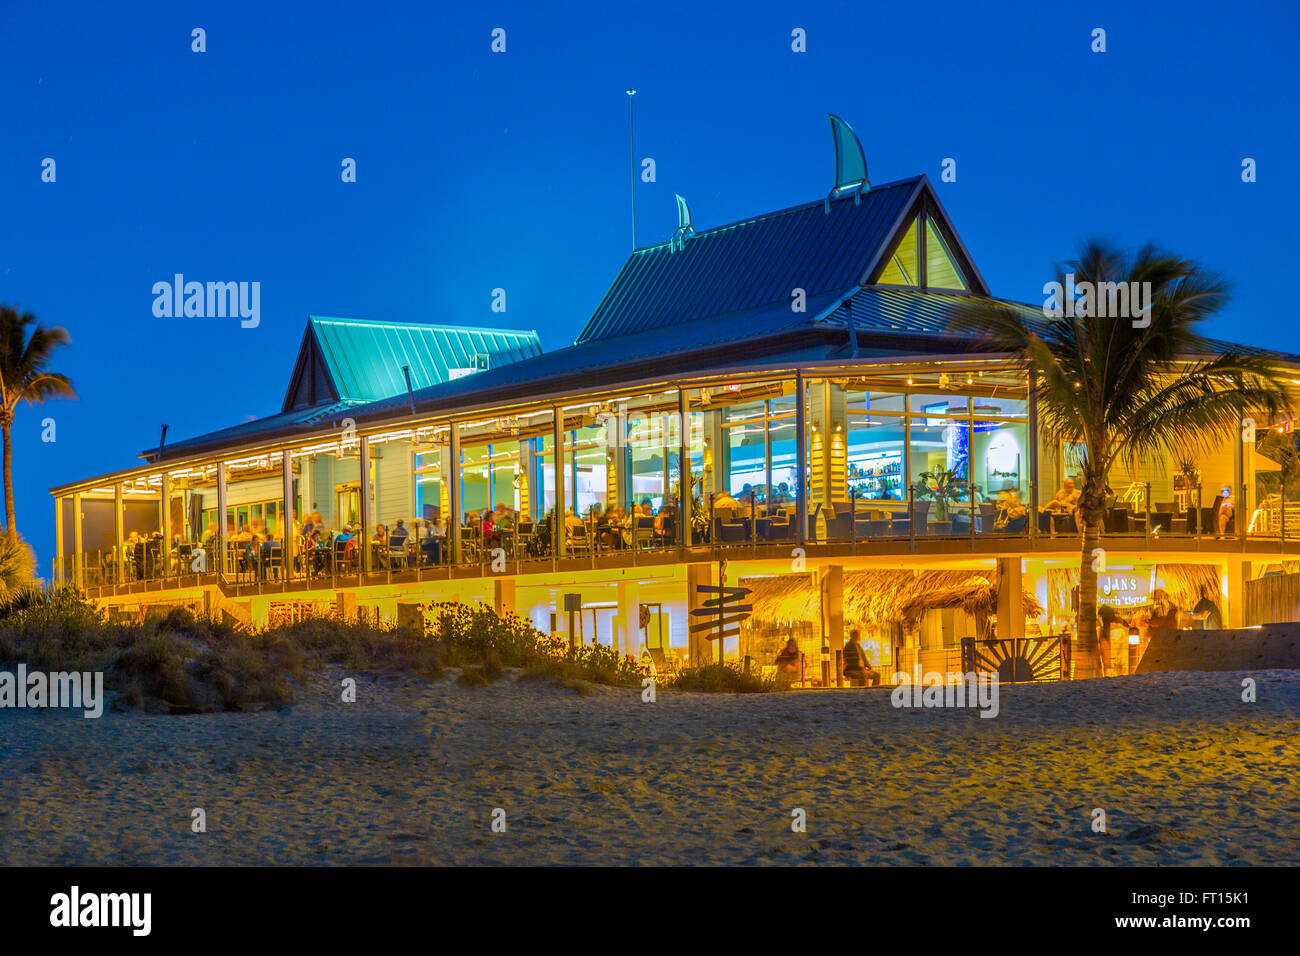 Fins restaurant at Sharky's on the Pier at dusk on the Gulf of Mexico in Venice Florida Stock Photo